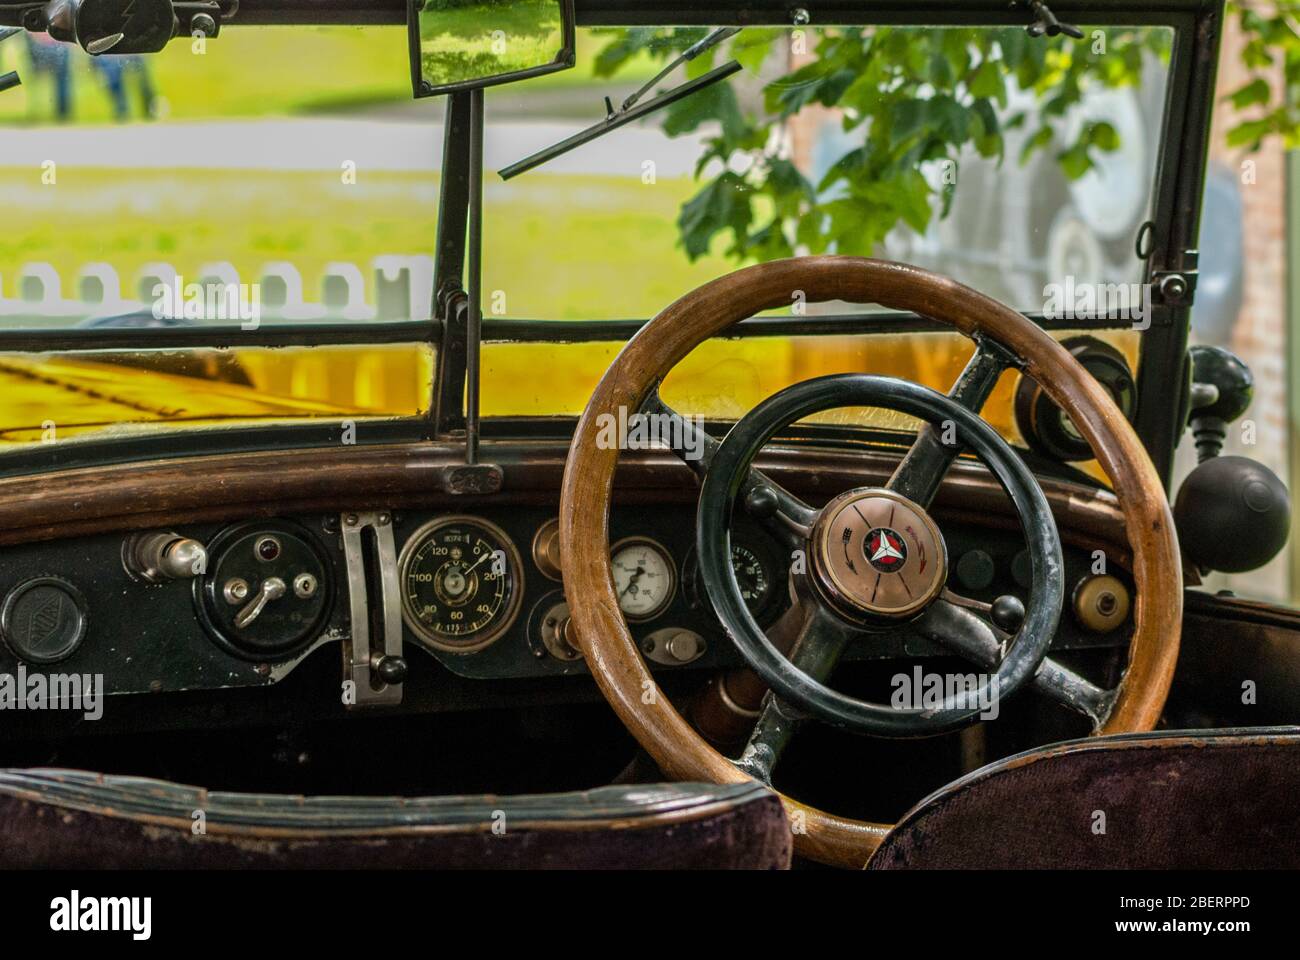 View from the back seat of a Vintage car. Wooden steering wheel, dash board and instruments. Stock Photo